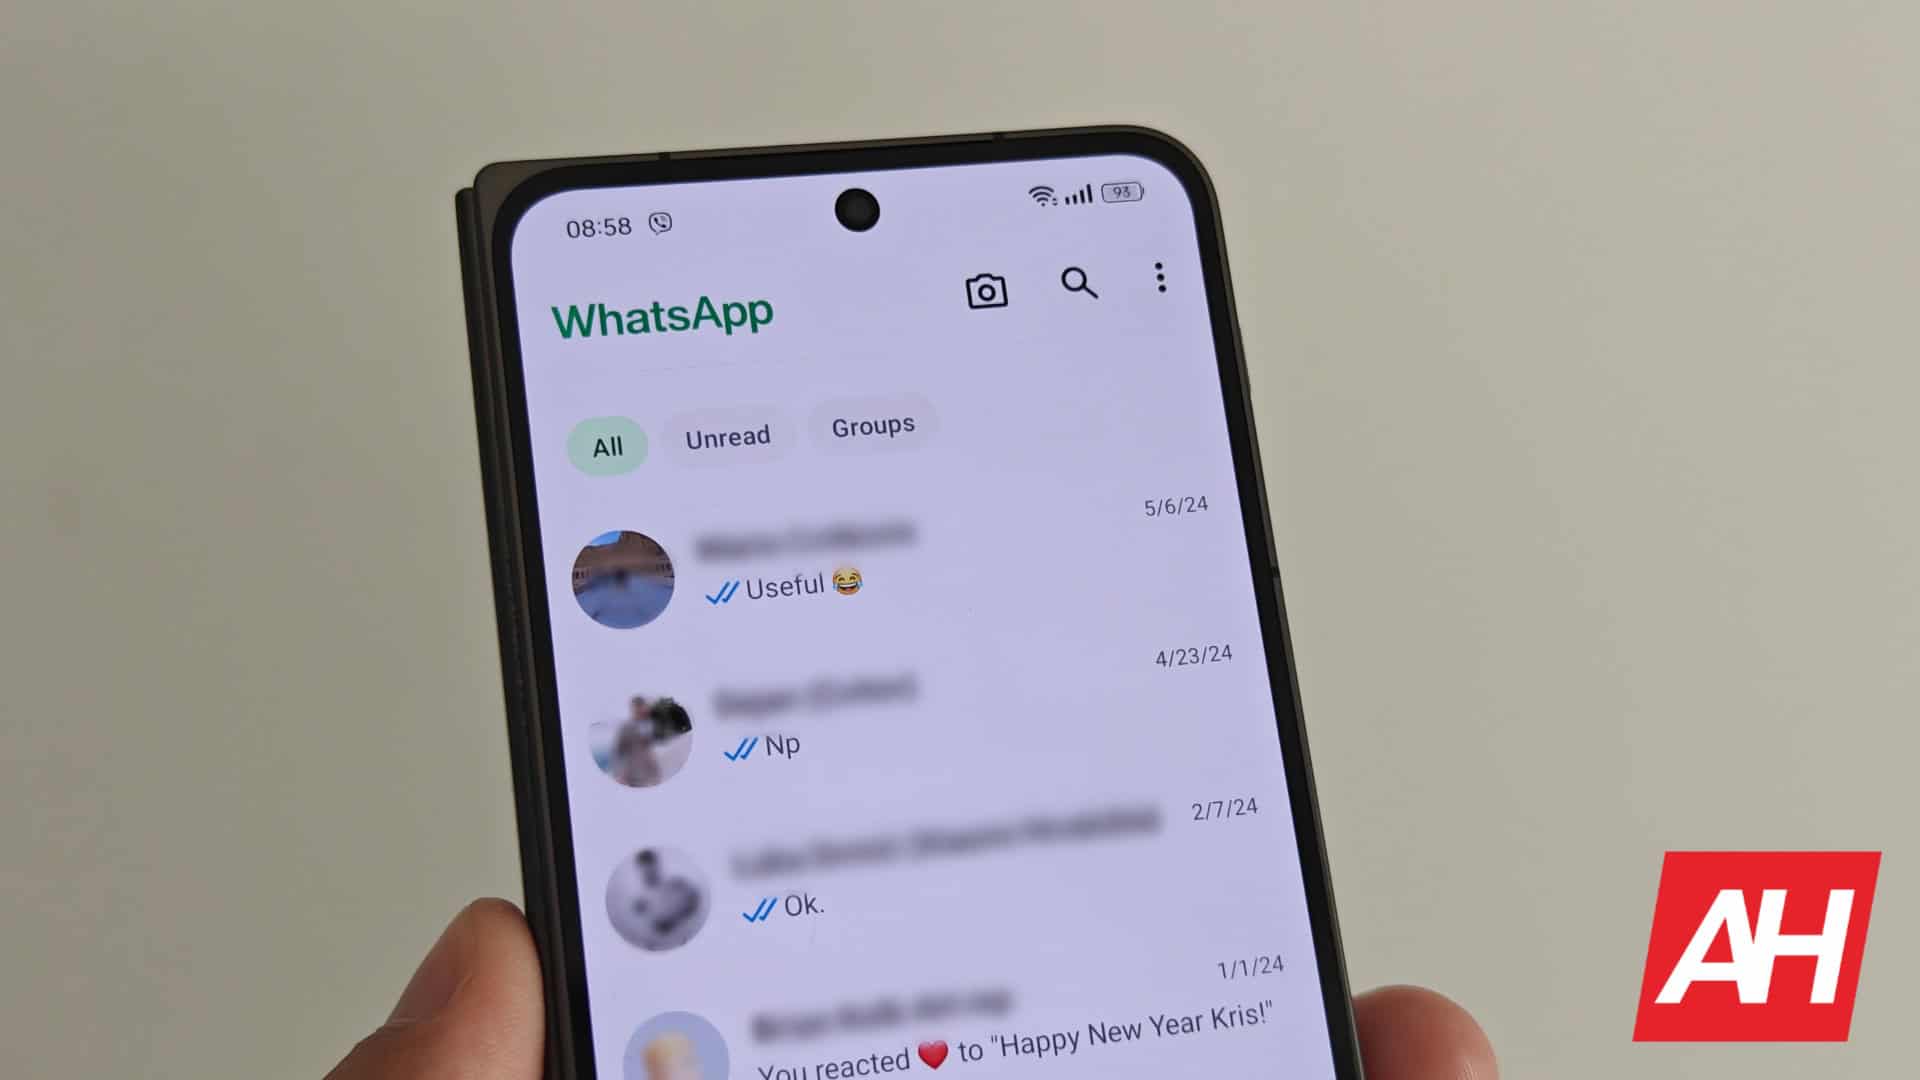 WhatsApp has a new design on Android and iOS, with less color